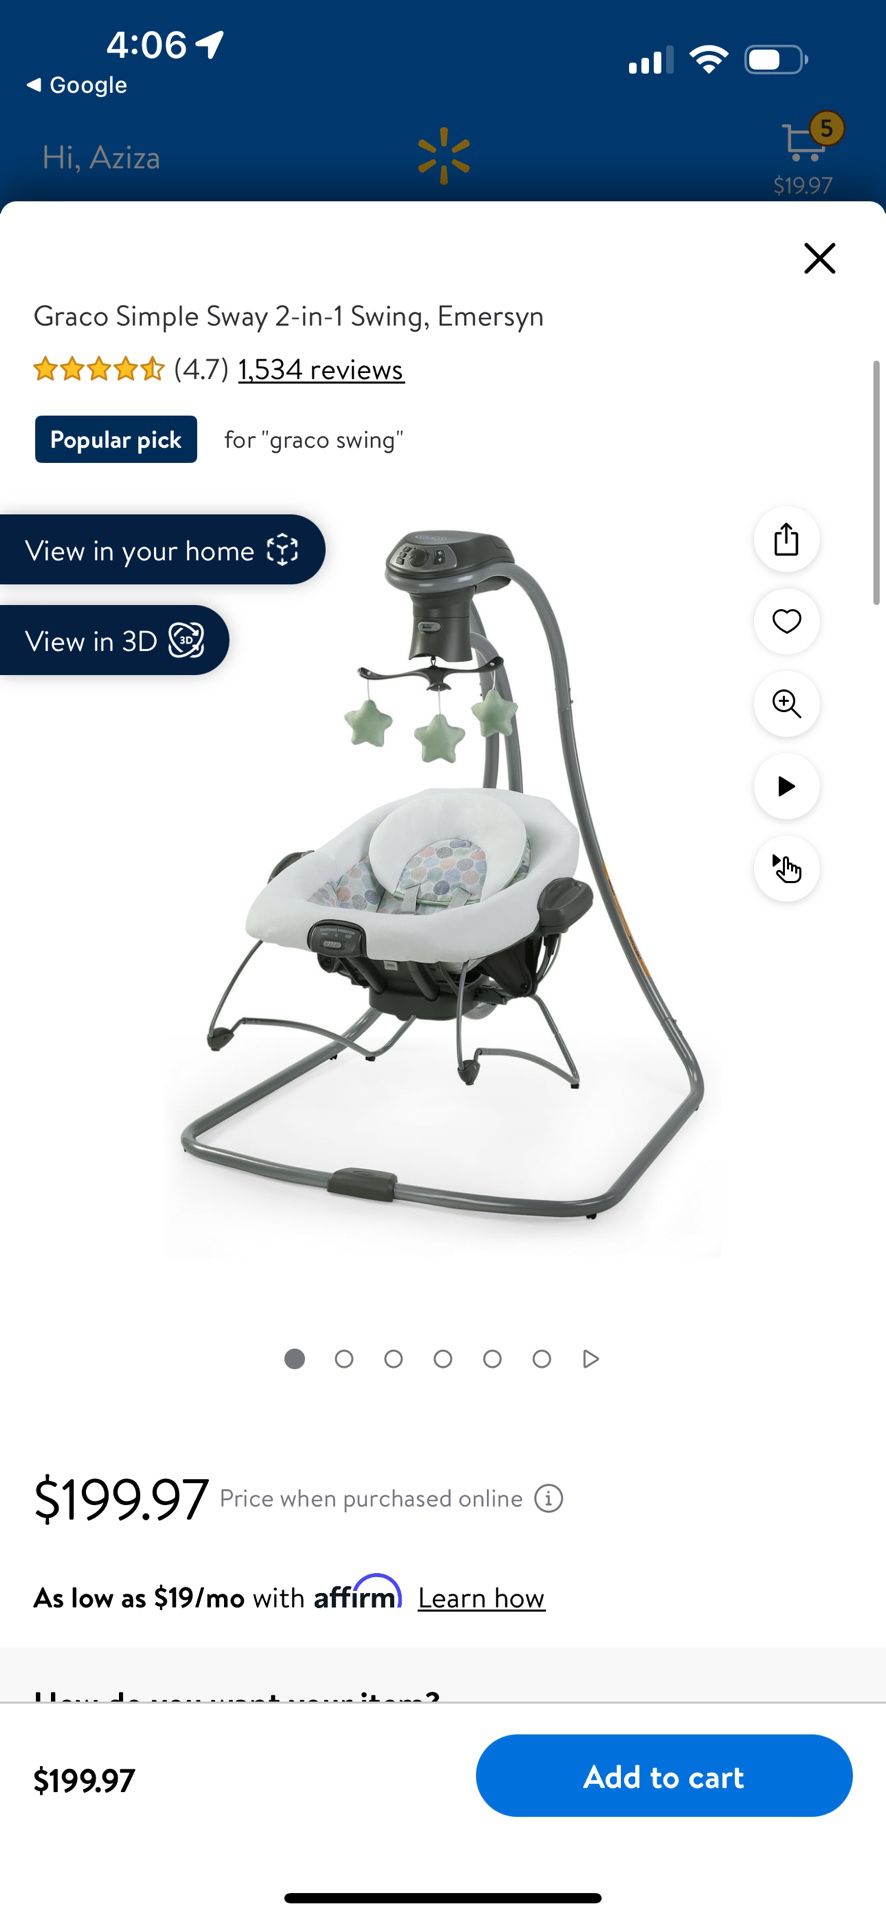 The Graco Simple Sway 2-in 1